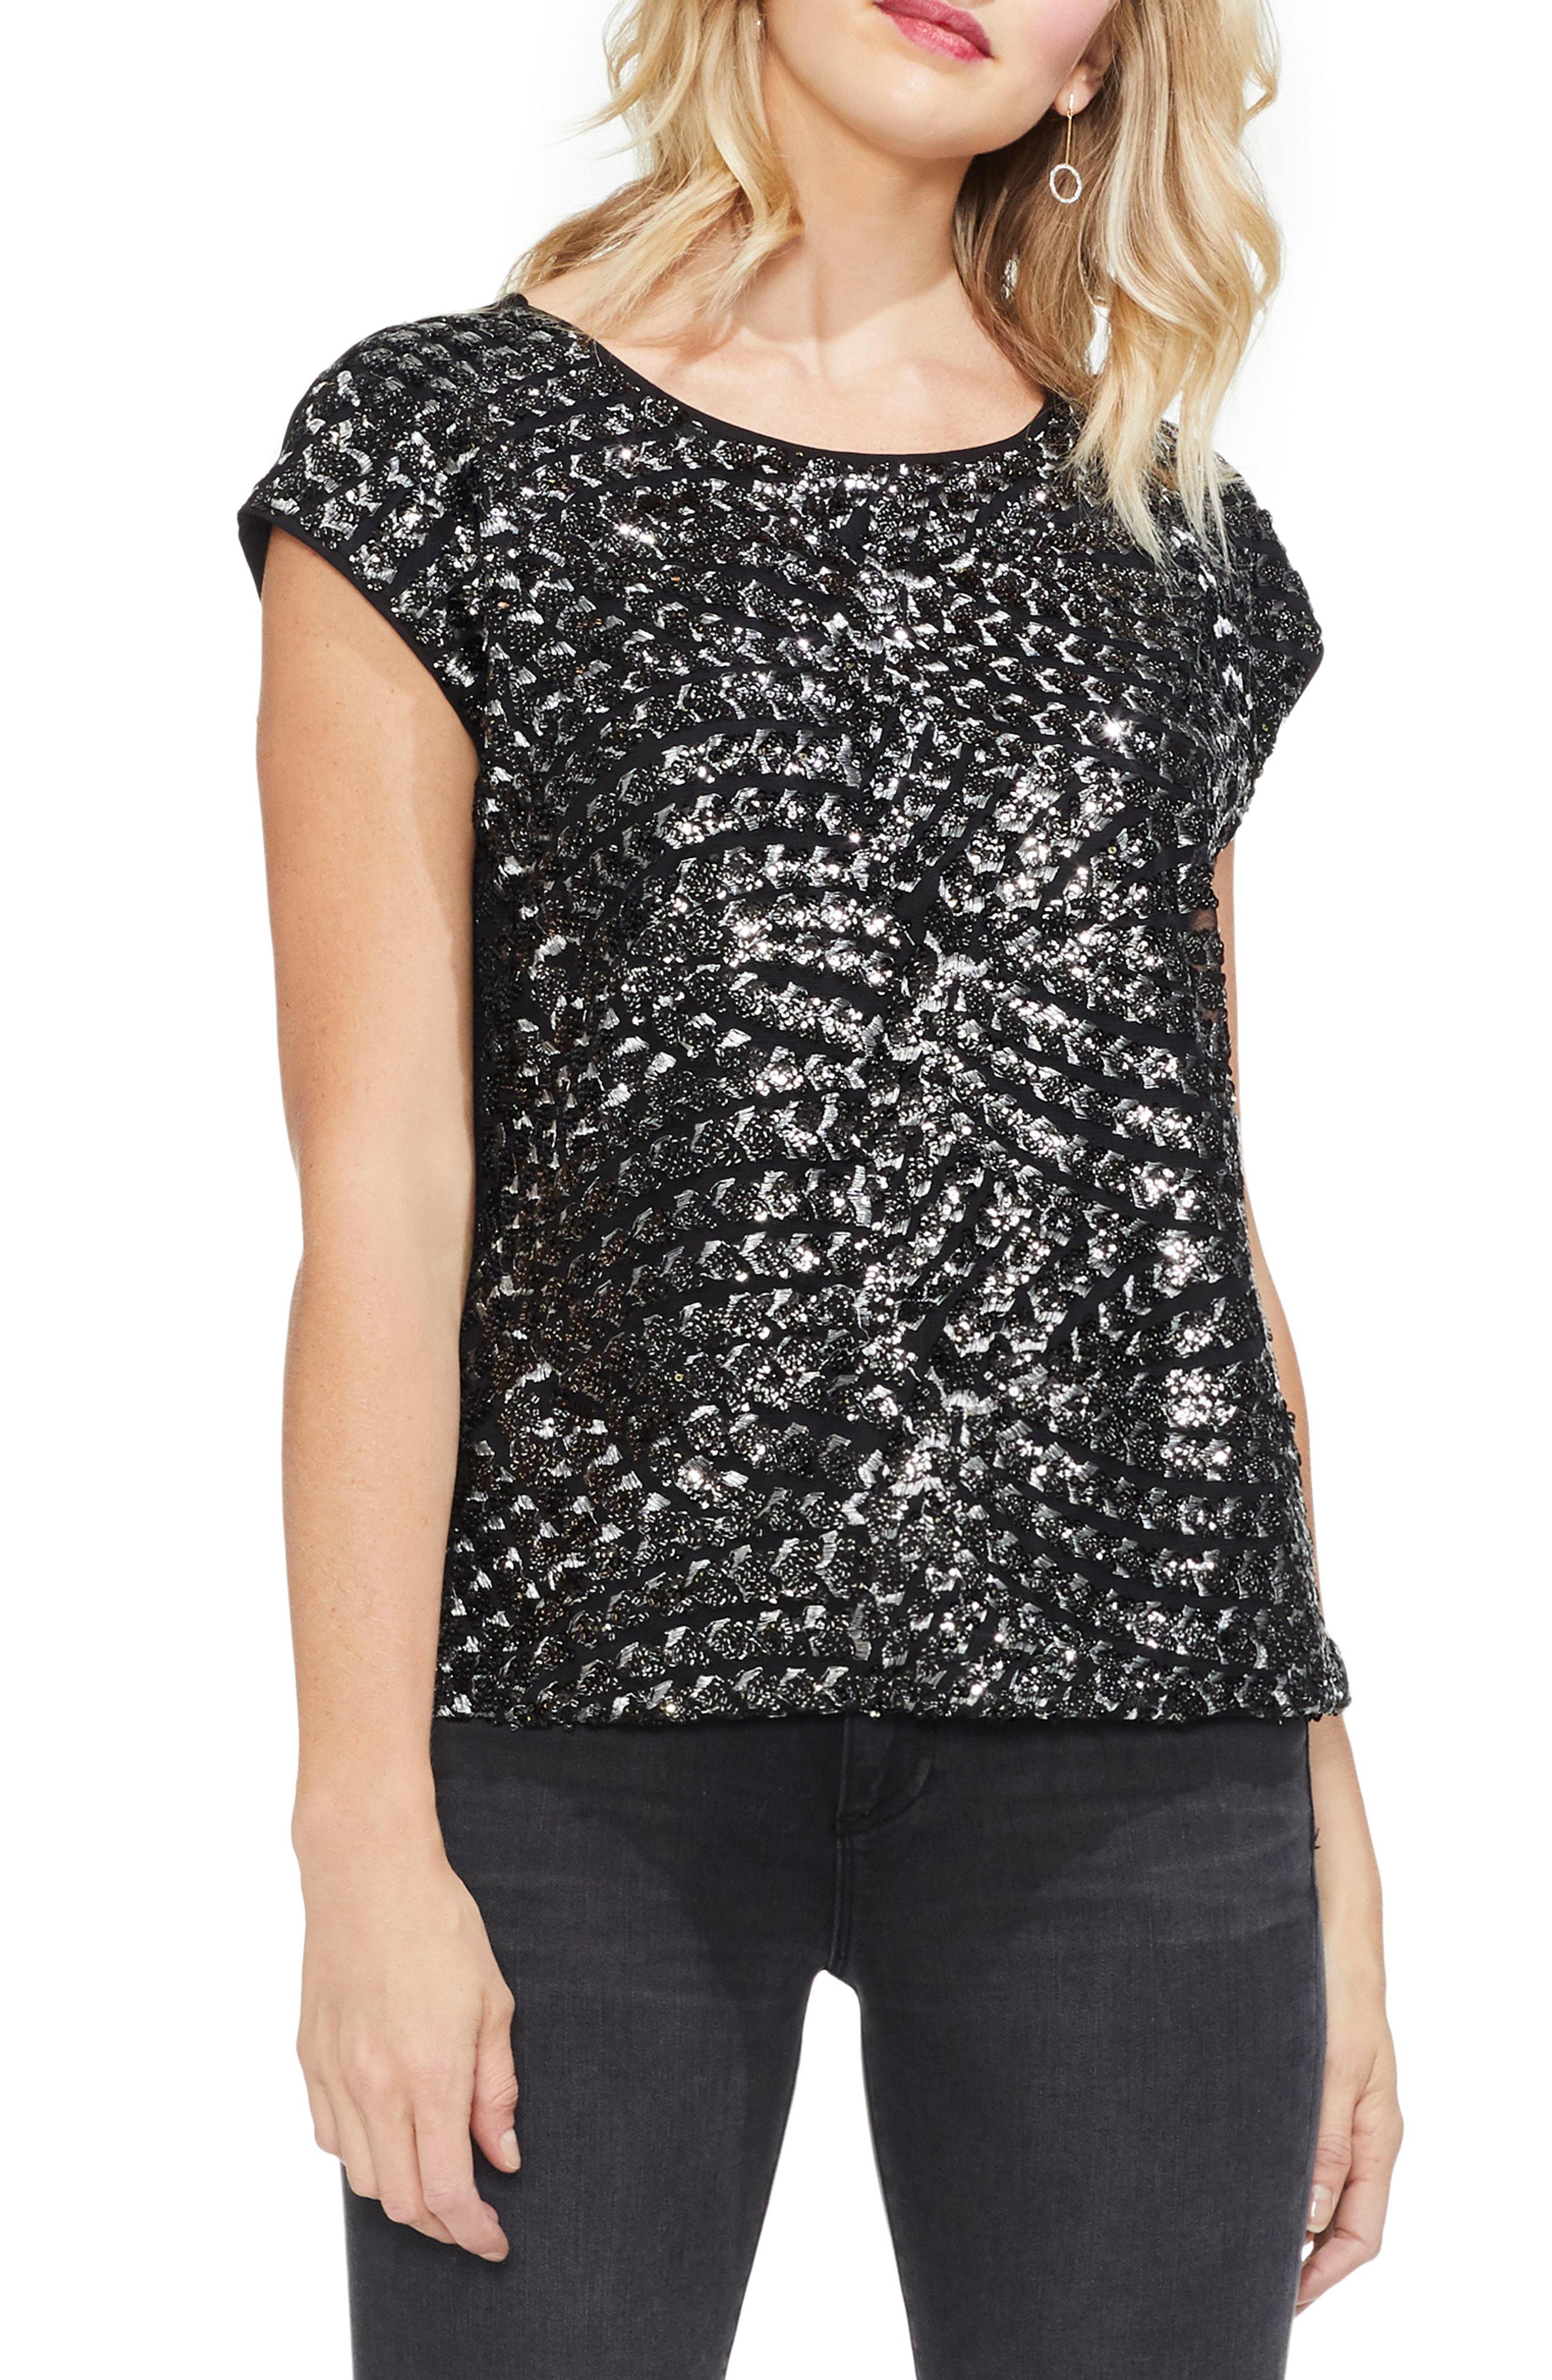 Lyst - Vince Camuto Sequined-front Top in Black